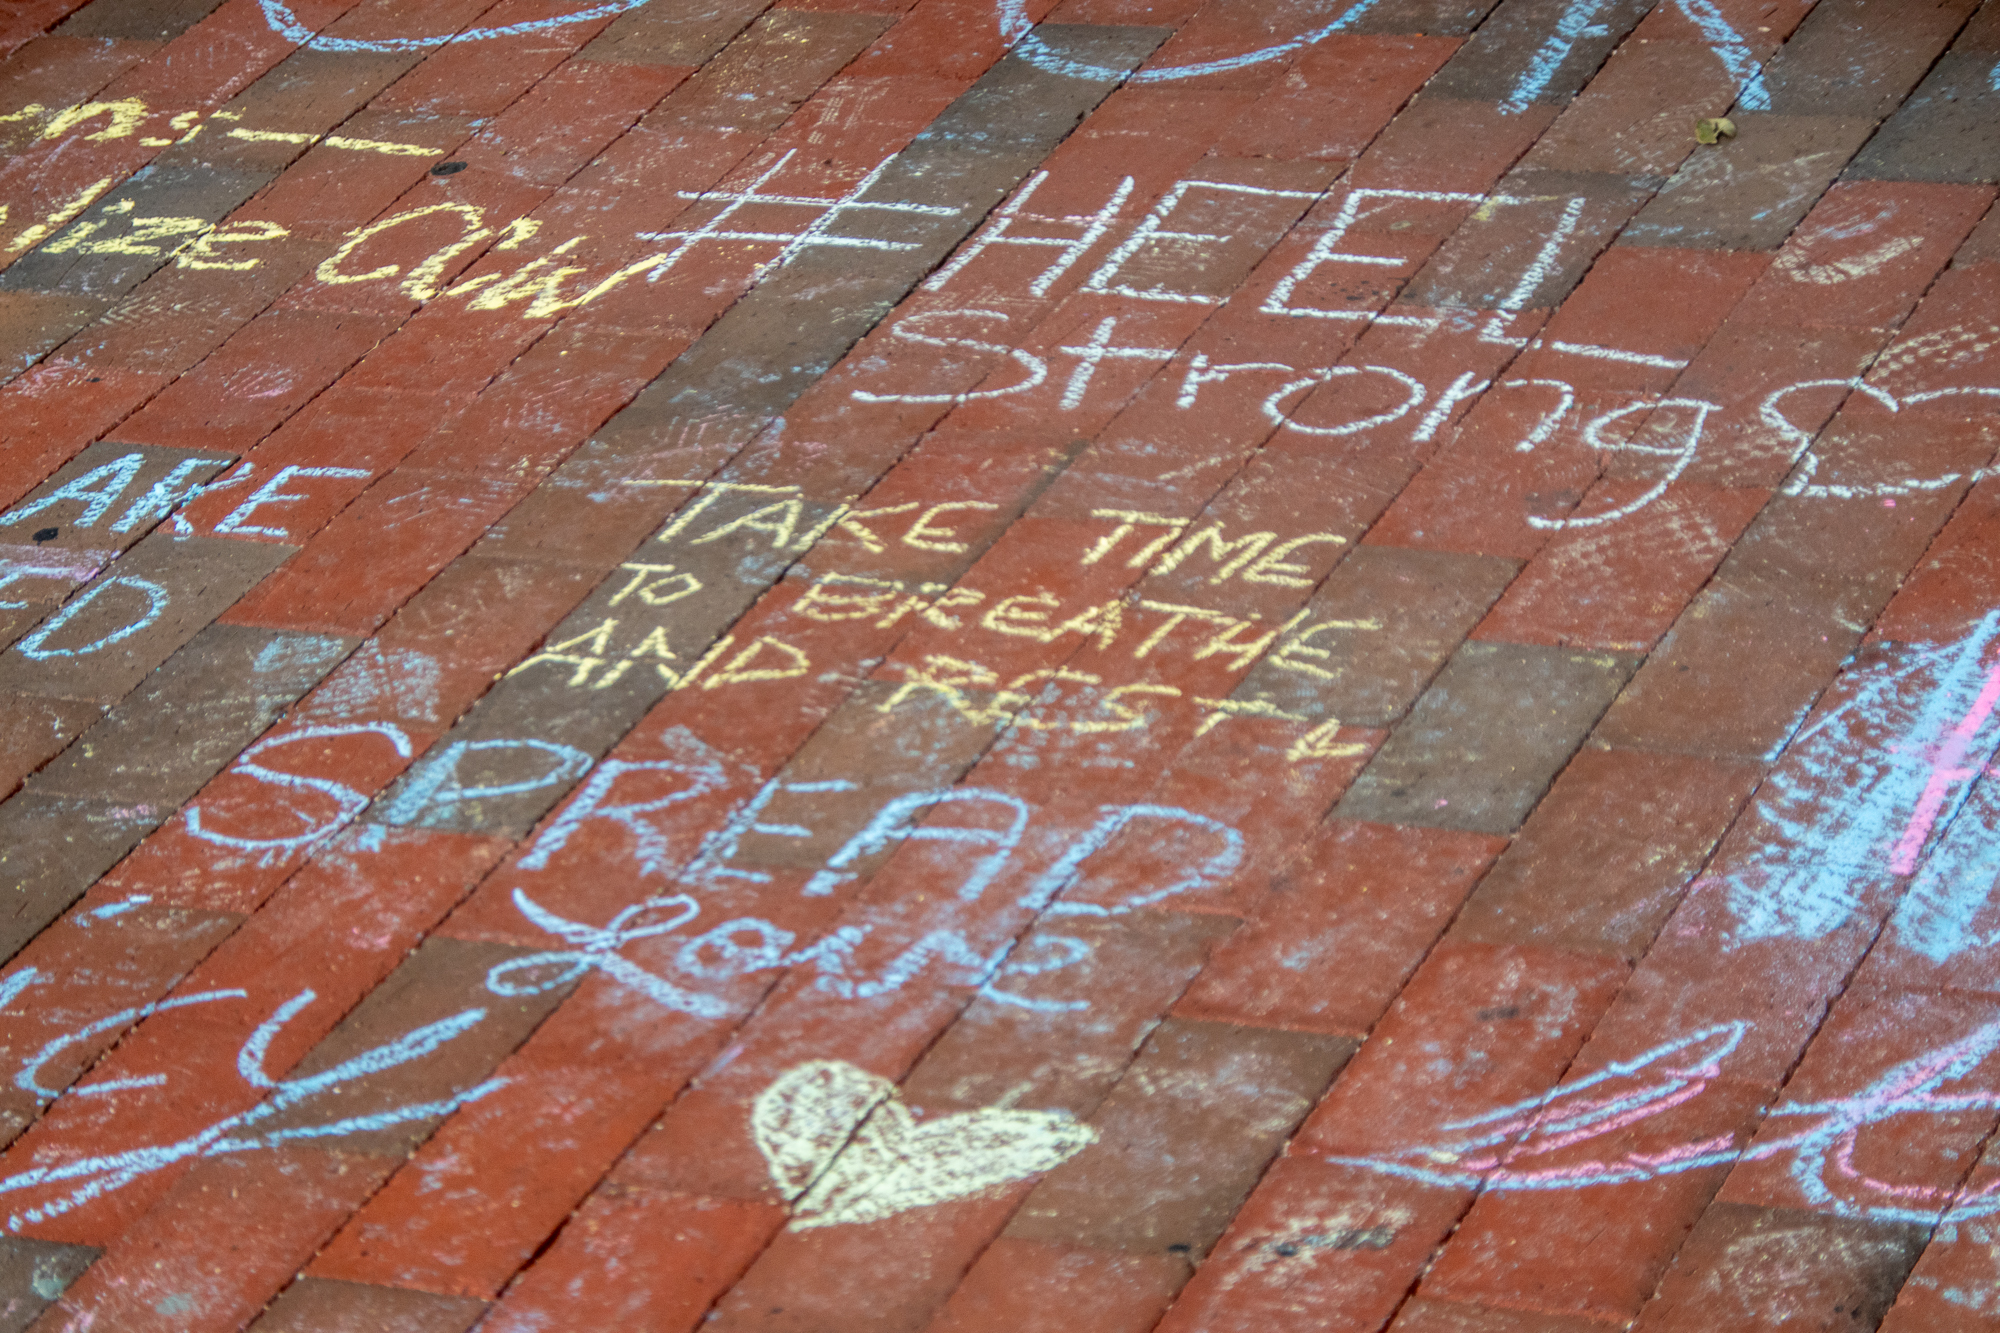 Messages in front of the Carolina Union written by students.